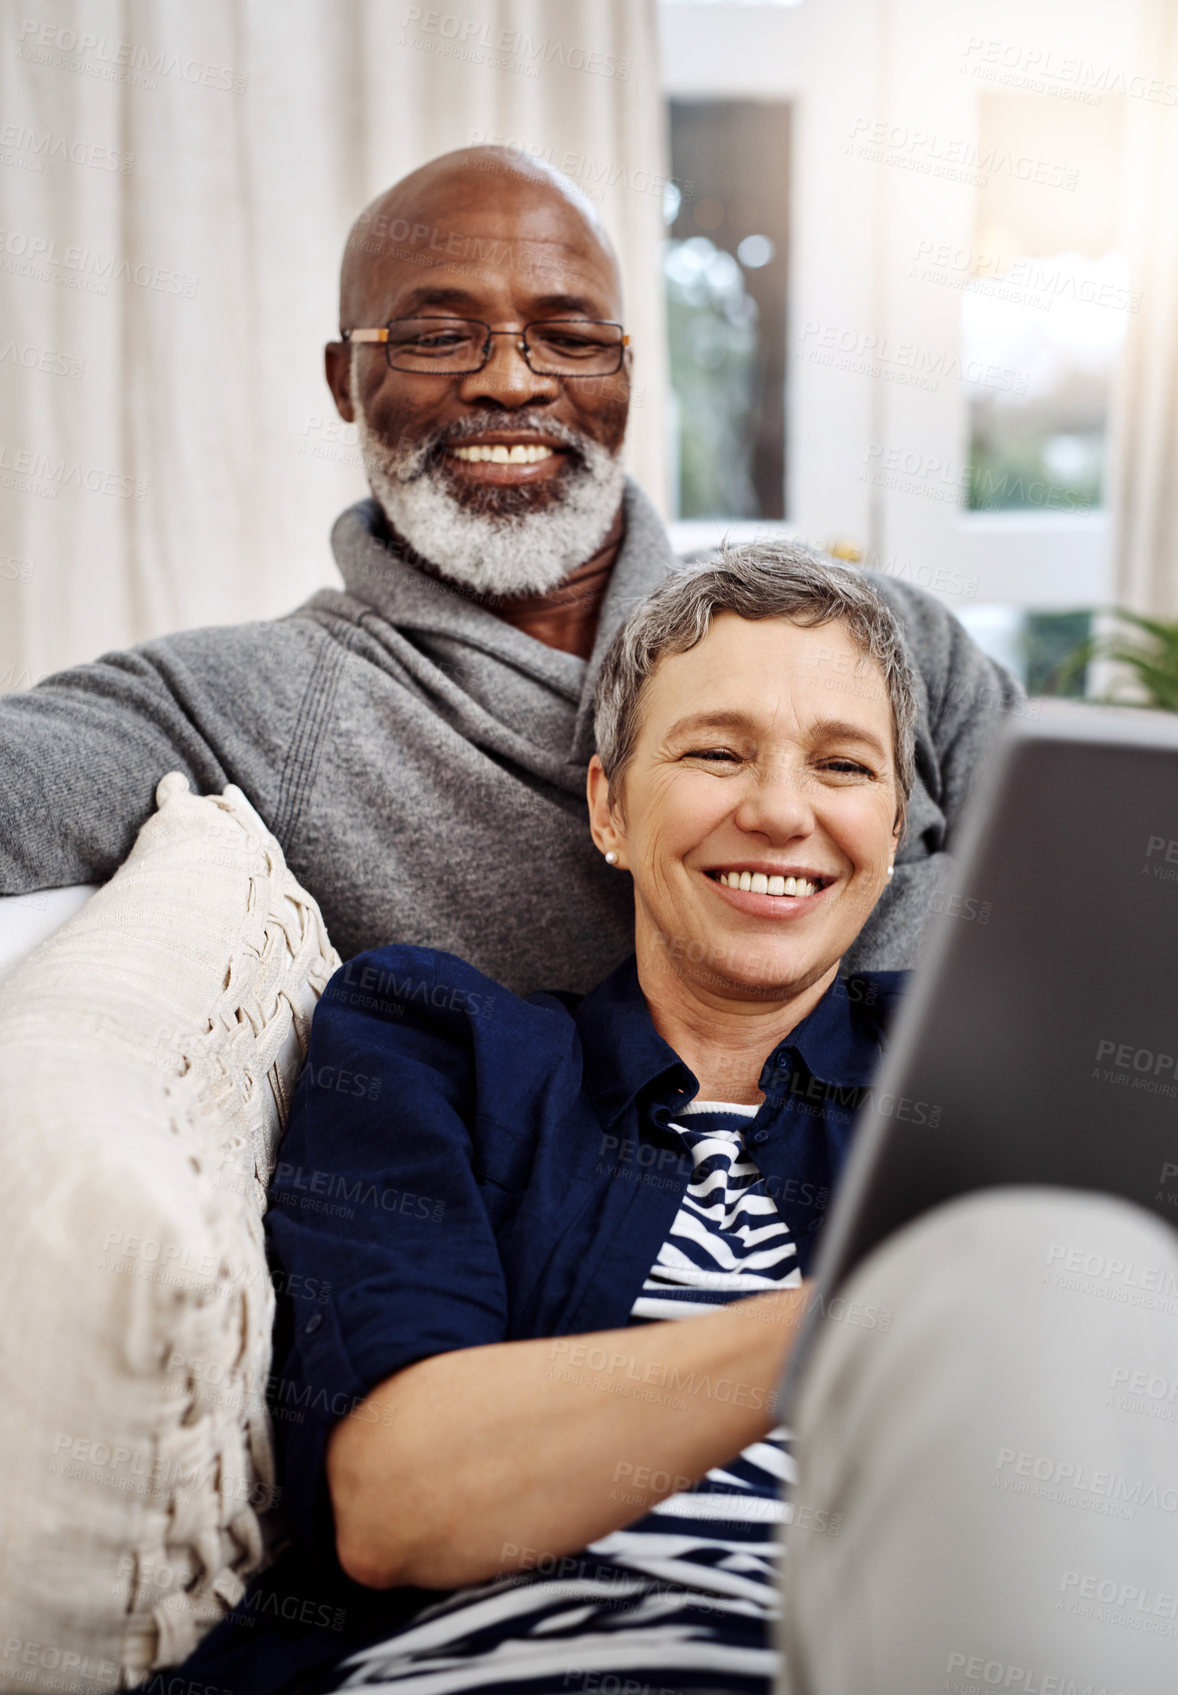 Buy stock photo Shot of an affectionate senior couple using a tablet while relaxing on the sofa at home